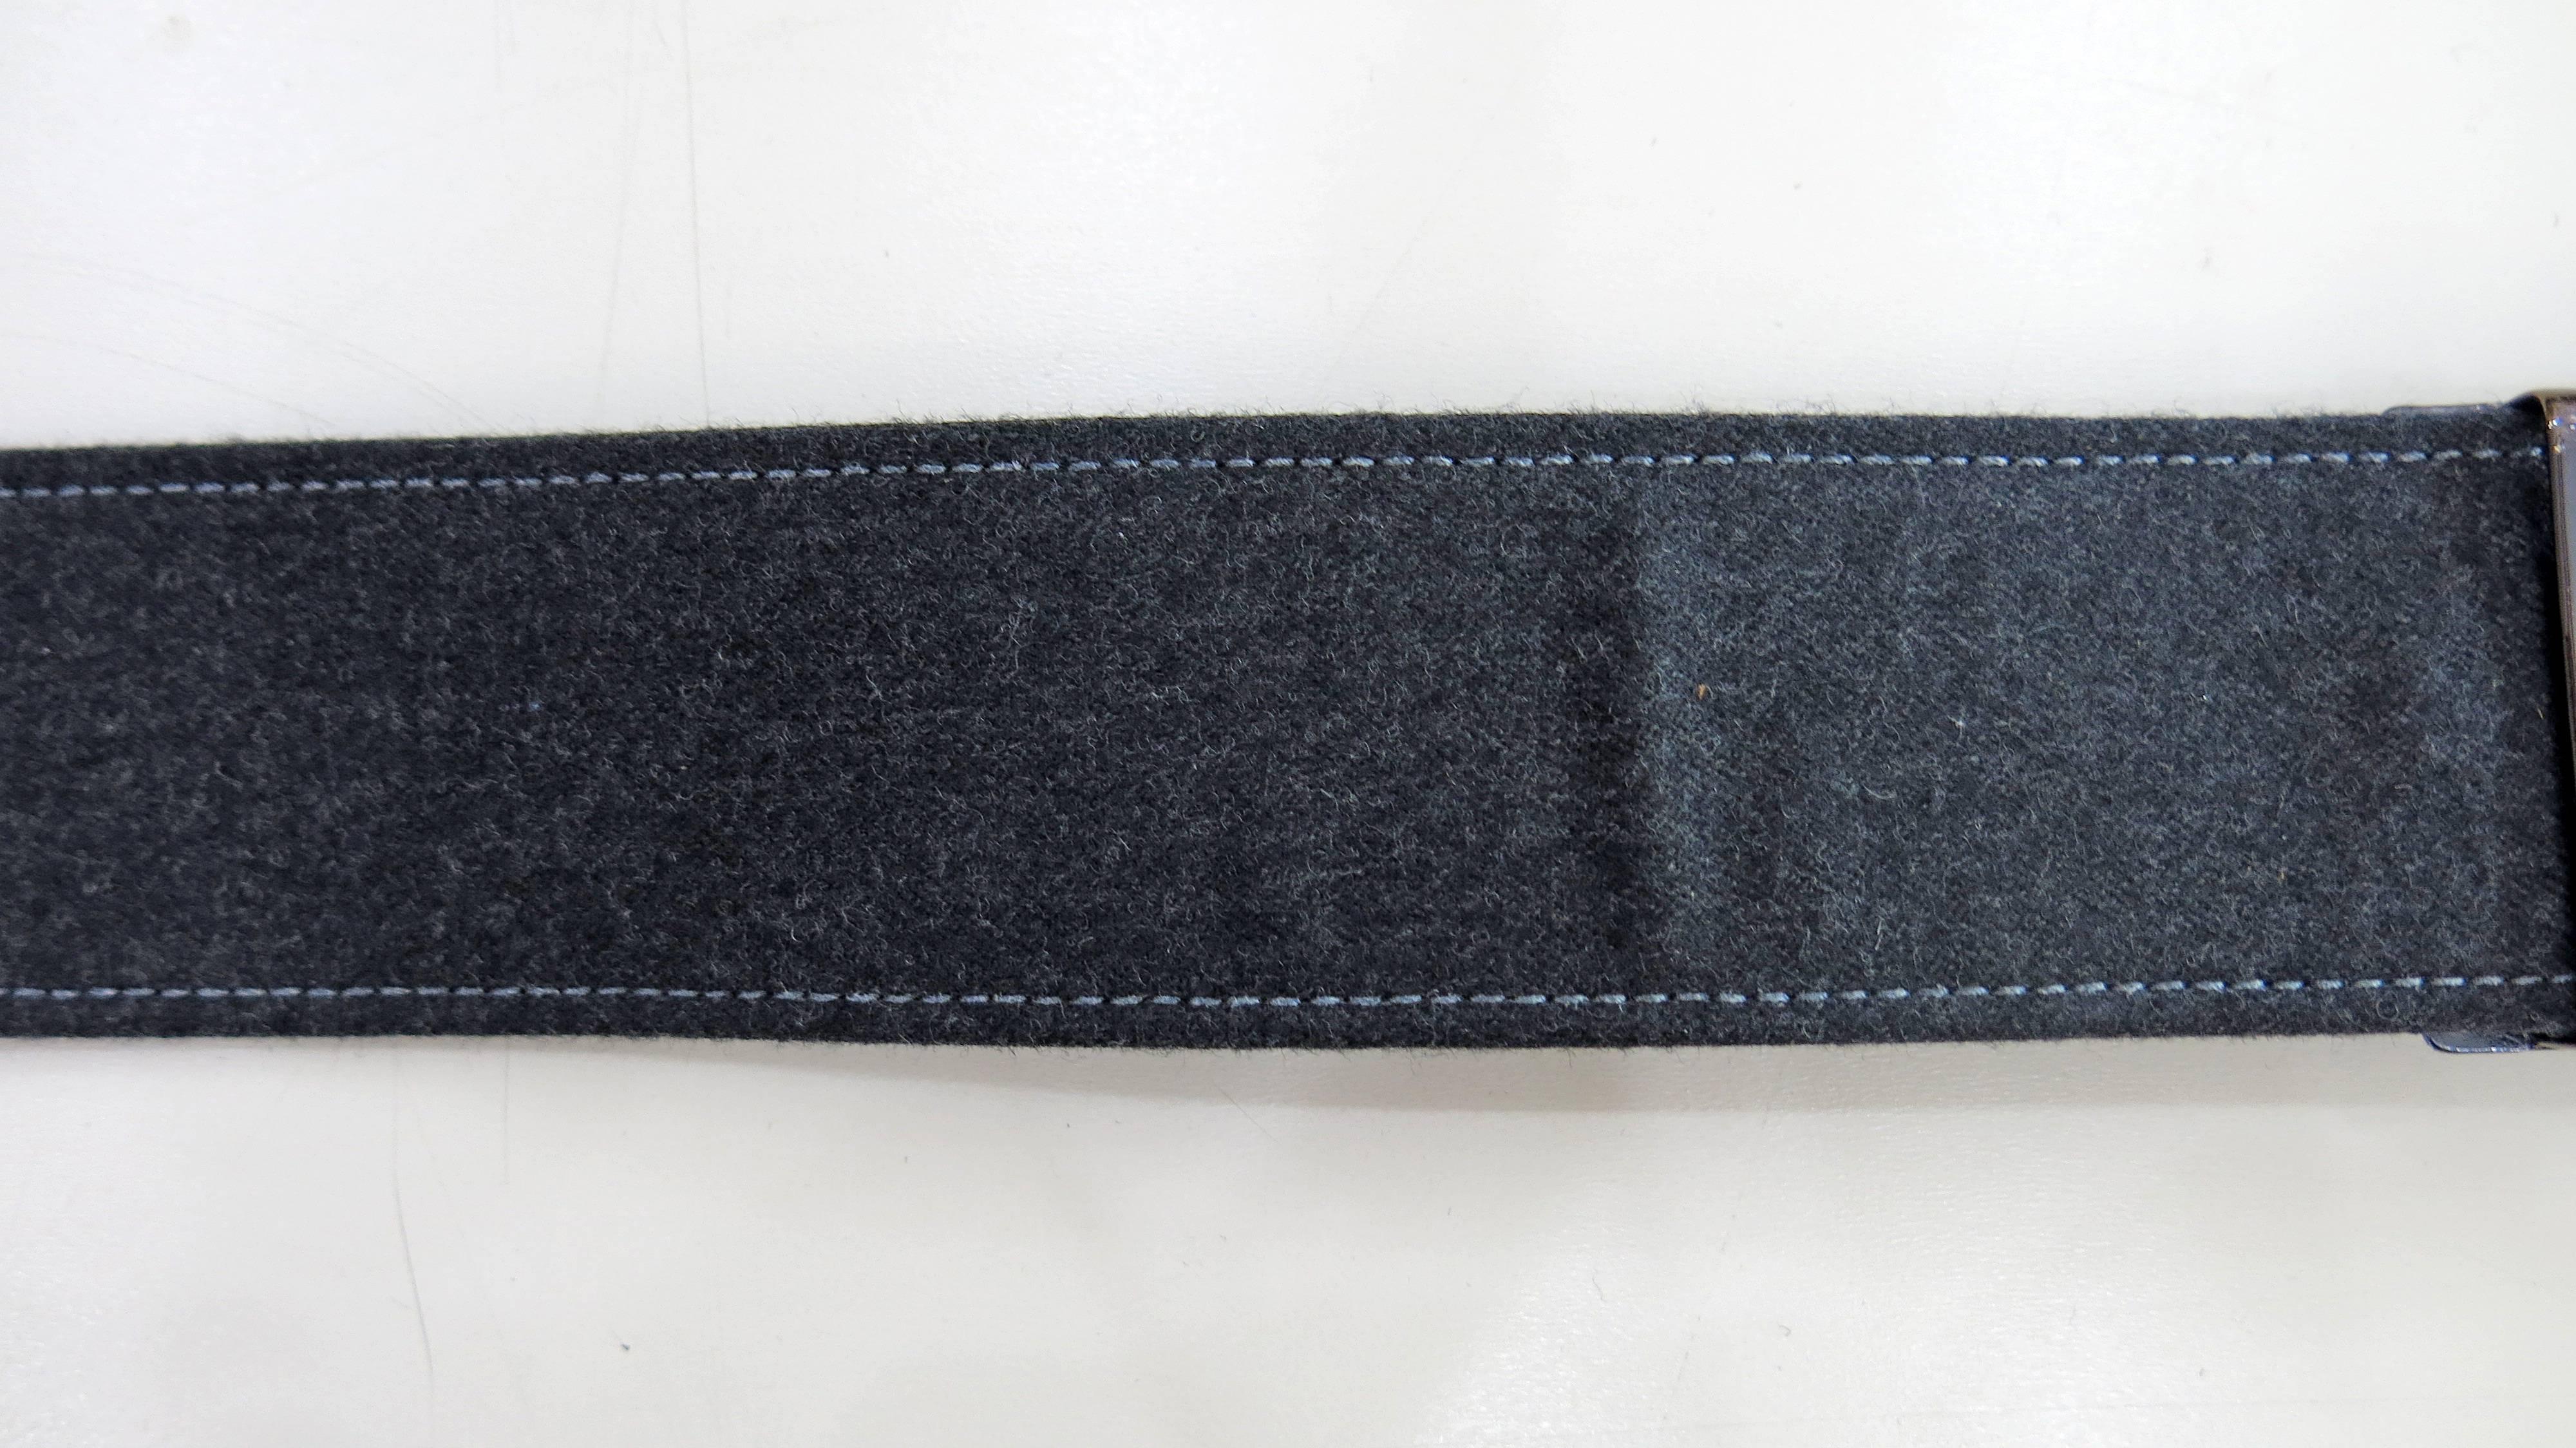 Dark gray wool belt with metal buckles and hardware. Leather on the underside. Gray stitching. Stamped with the Oscar de la Renta logo. 30 inches in length and 1.5 inches in width. 

Originally a painter, Oscar de la Renta began his fashion career